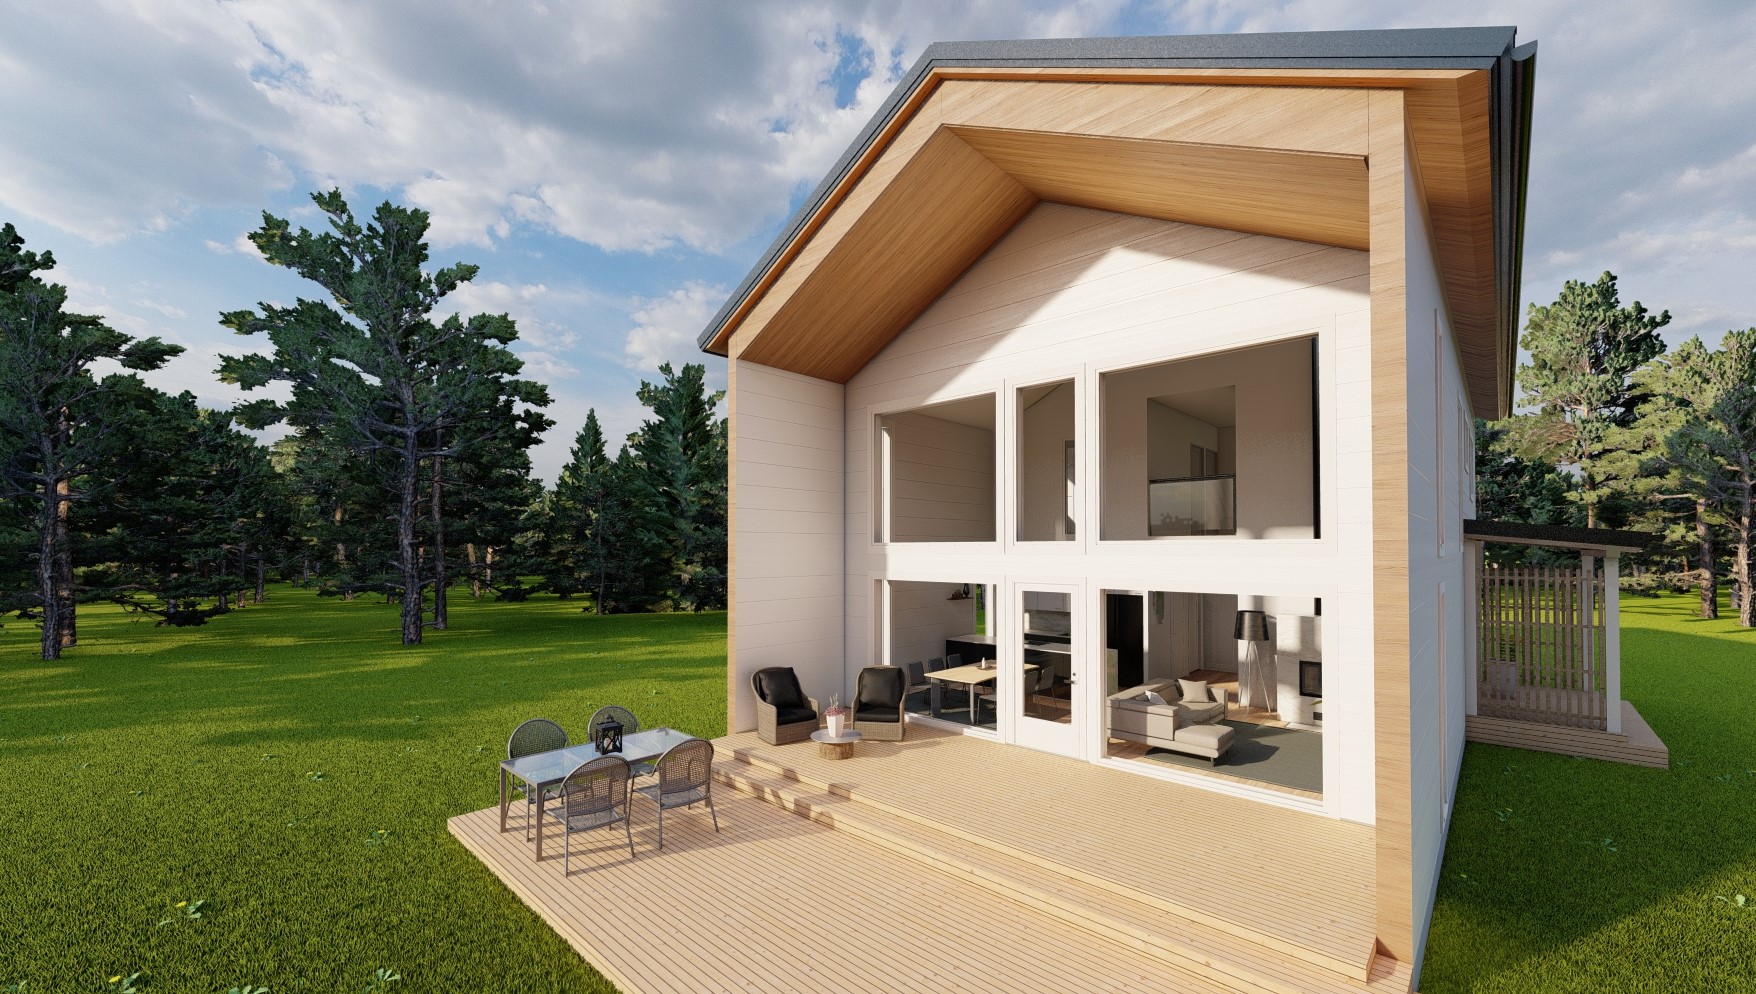 Hirsiset new collection dream log houses Haave terrace